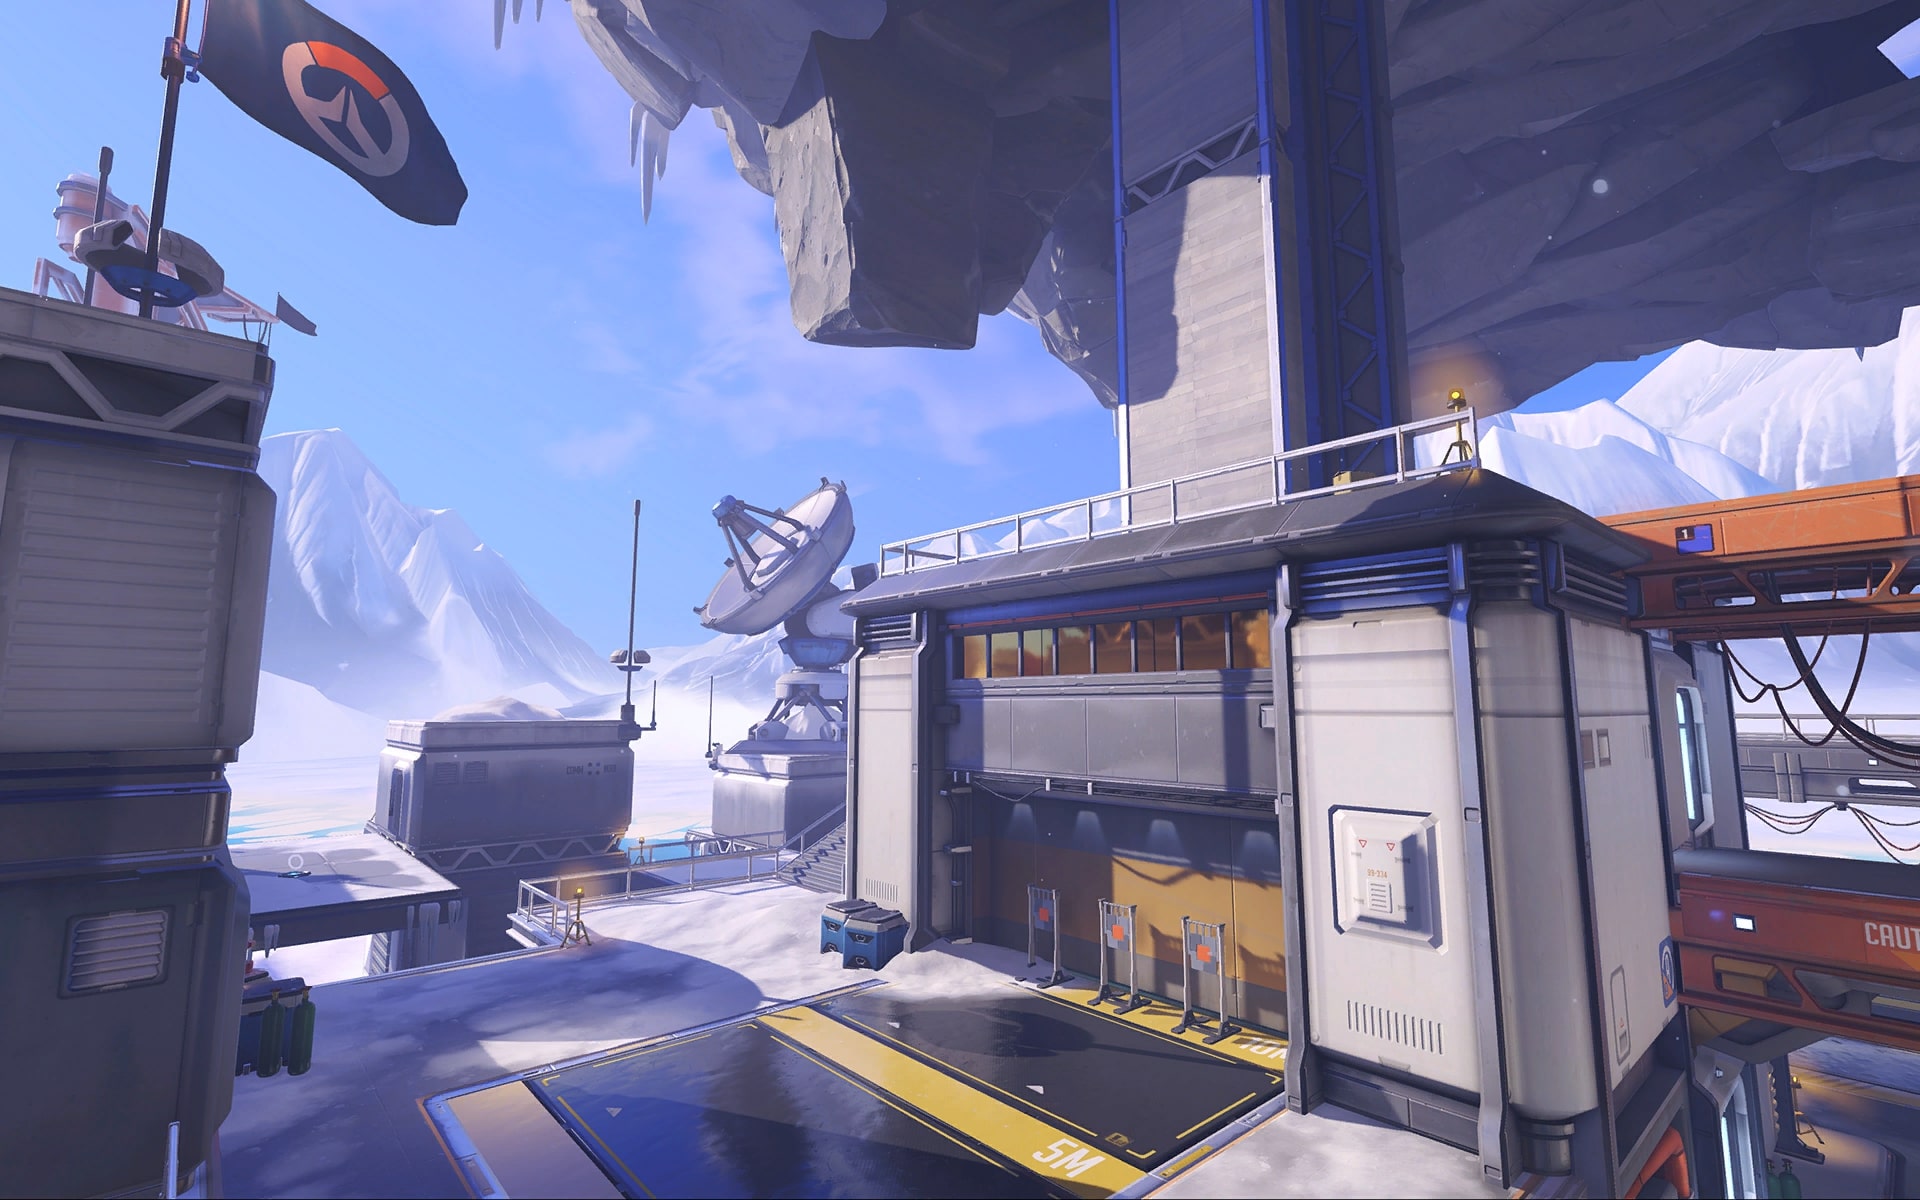 Best Custom Maps to Train Your Aim in Overwatch 2